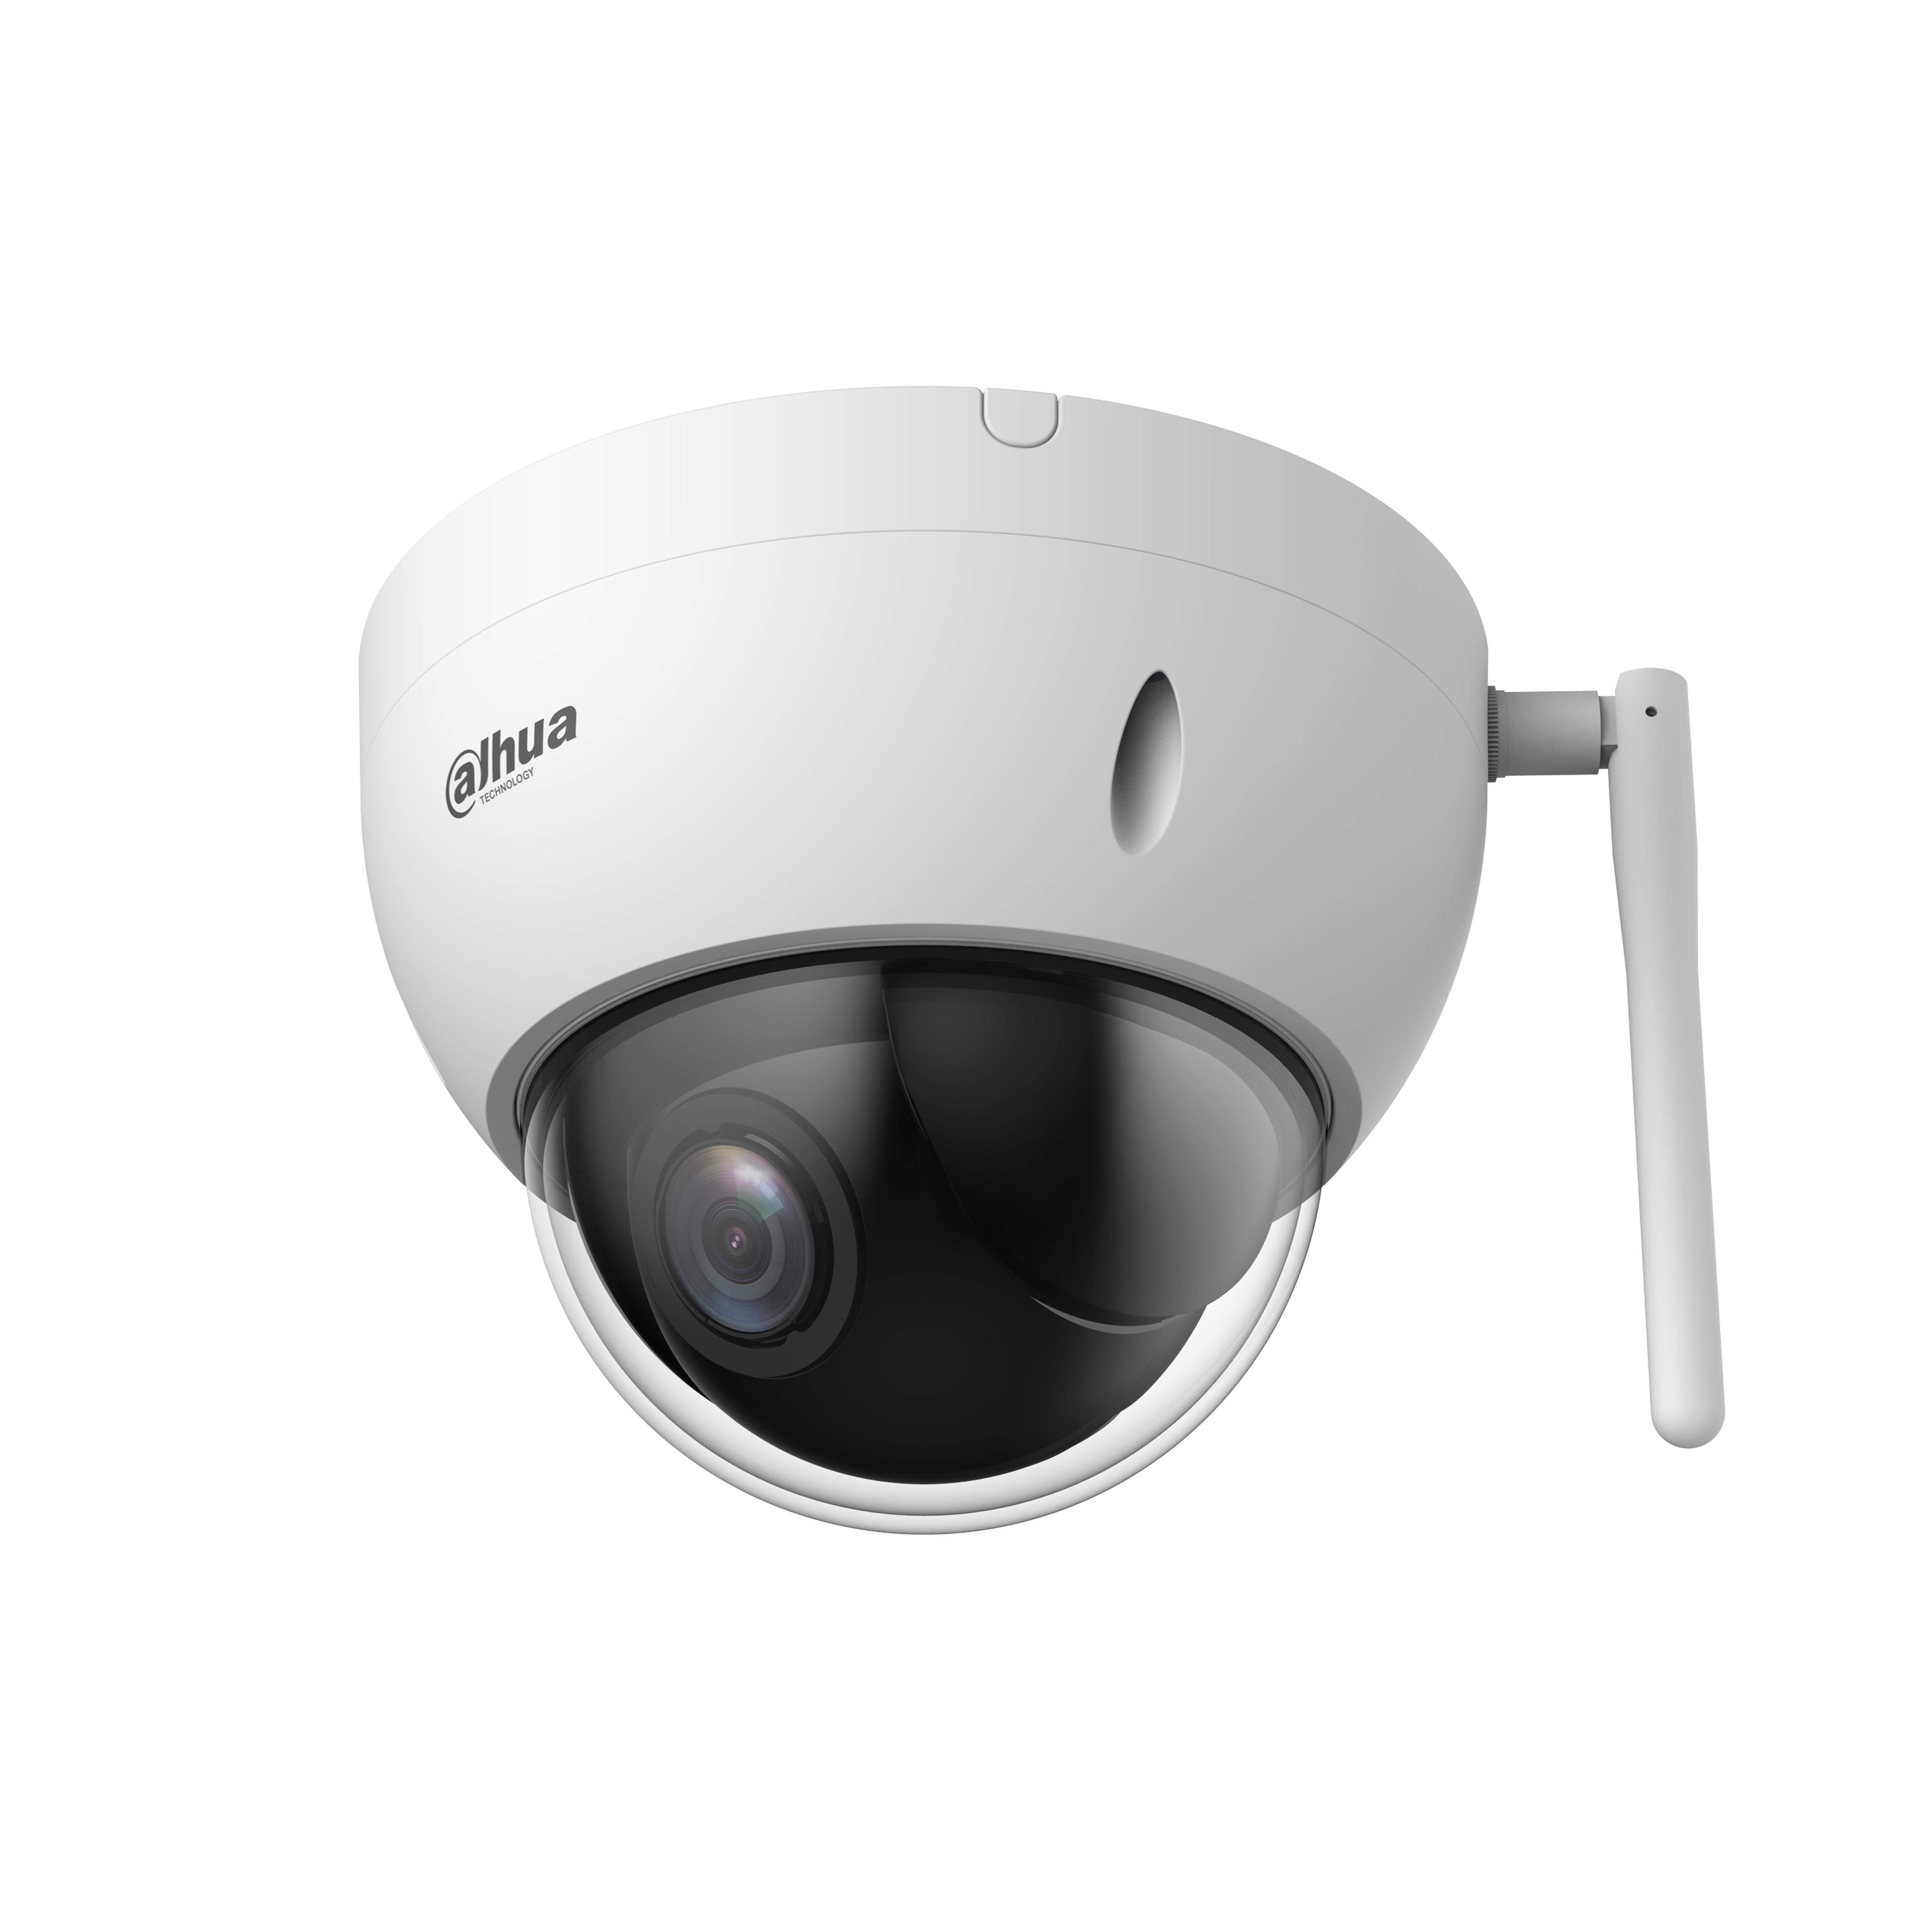 WIZSENSE SERIES IP CAMERA WHITE AI WIRELESS 4MP H.264/4+/5/5+ MINI PTZ DIGITAL WDR METAL 2.8-12MMMOTORISED LENS 4X ZOOM STARLIGHT IP66 WITHOUT MIC SUPPORT UP TO 512GB SDIK10 12VDC